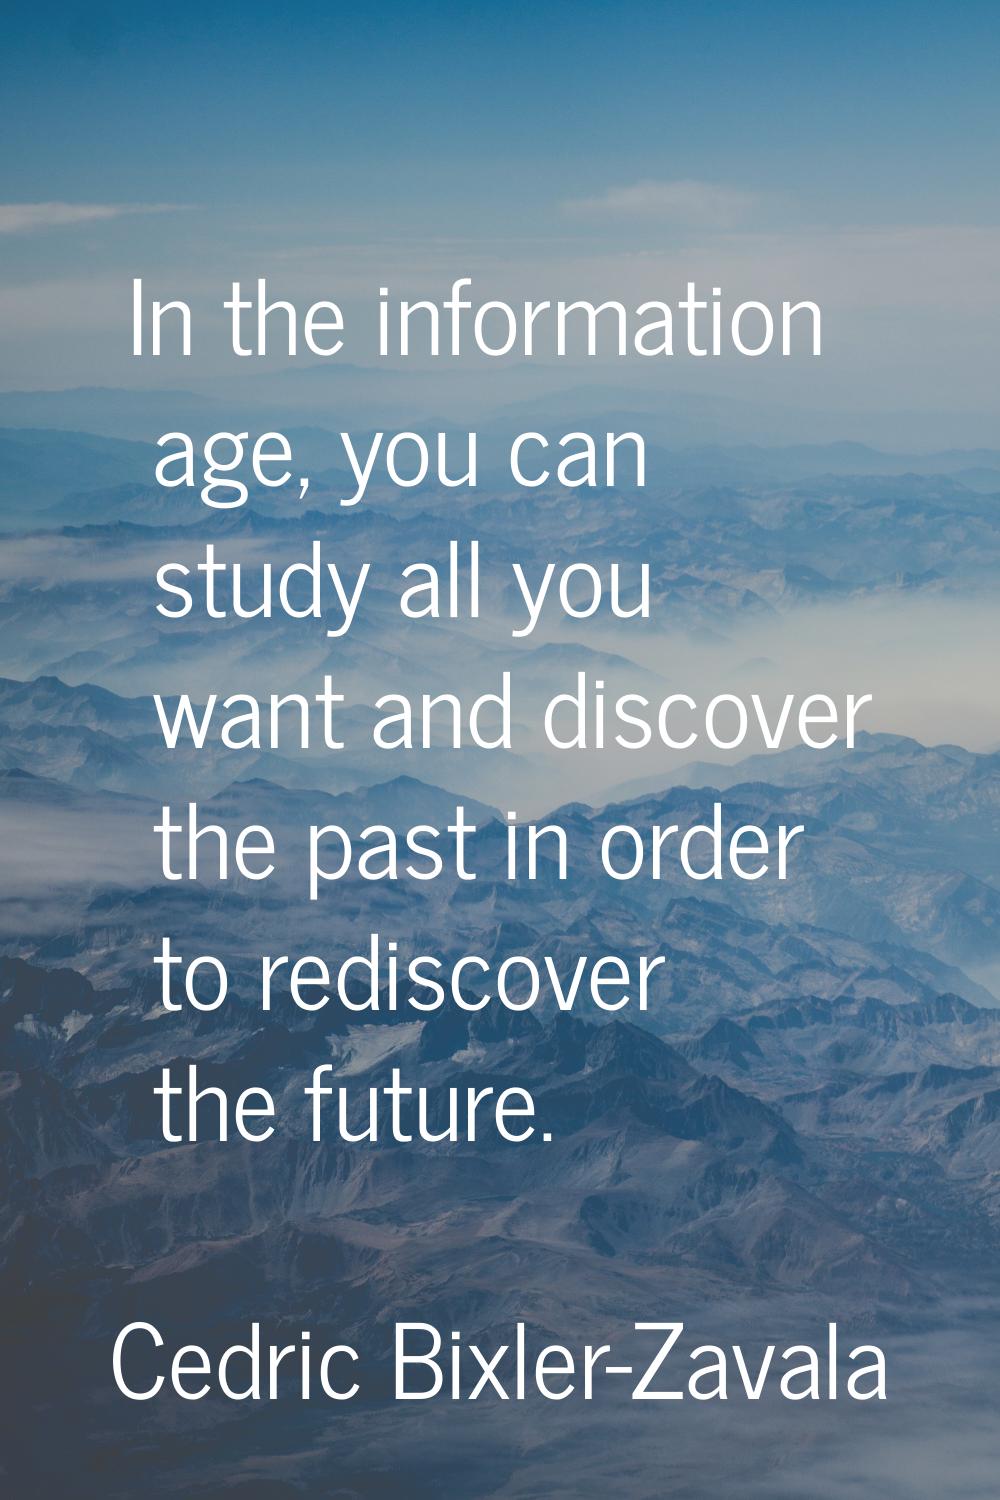 In the information age, you can study all you want and discover the past in order to rediscover the